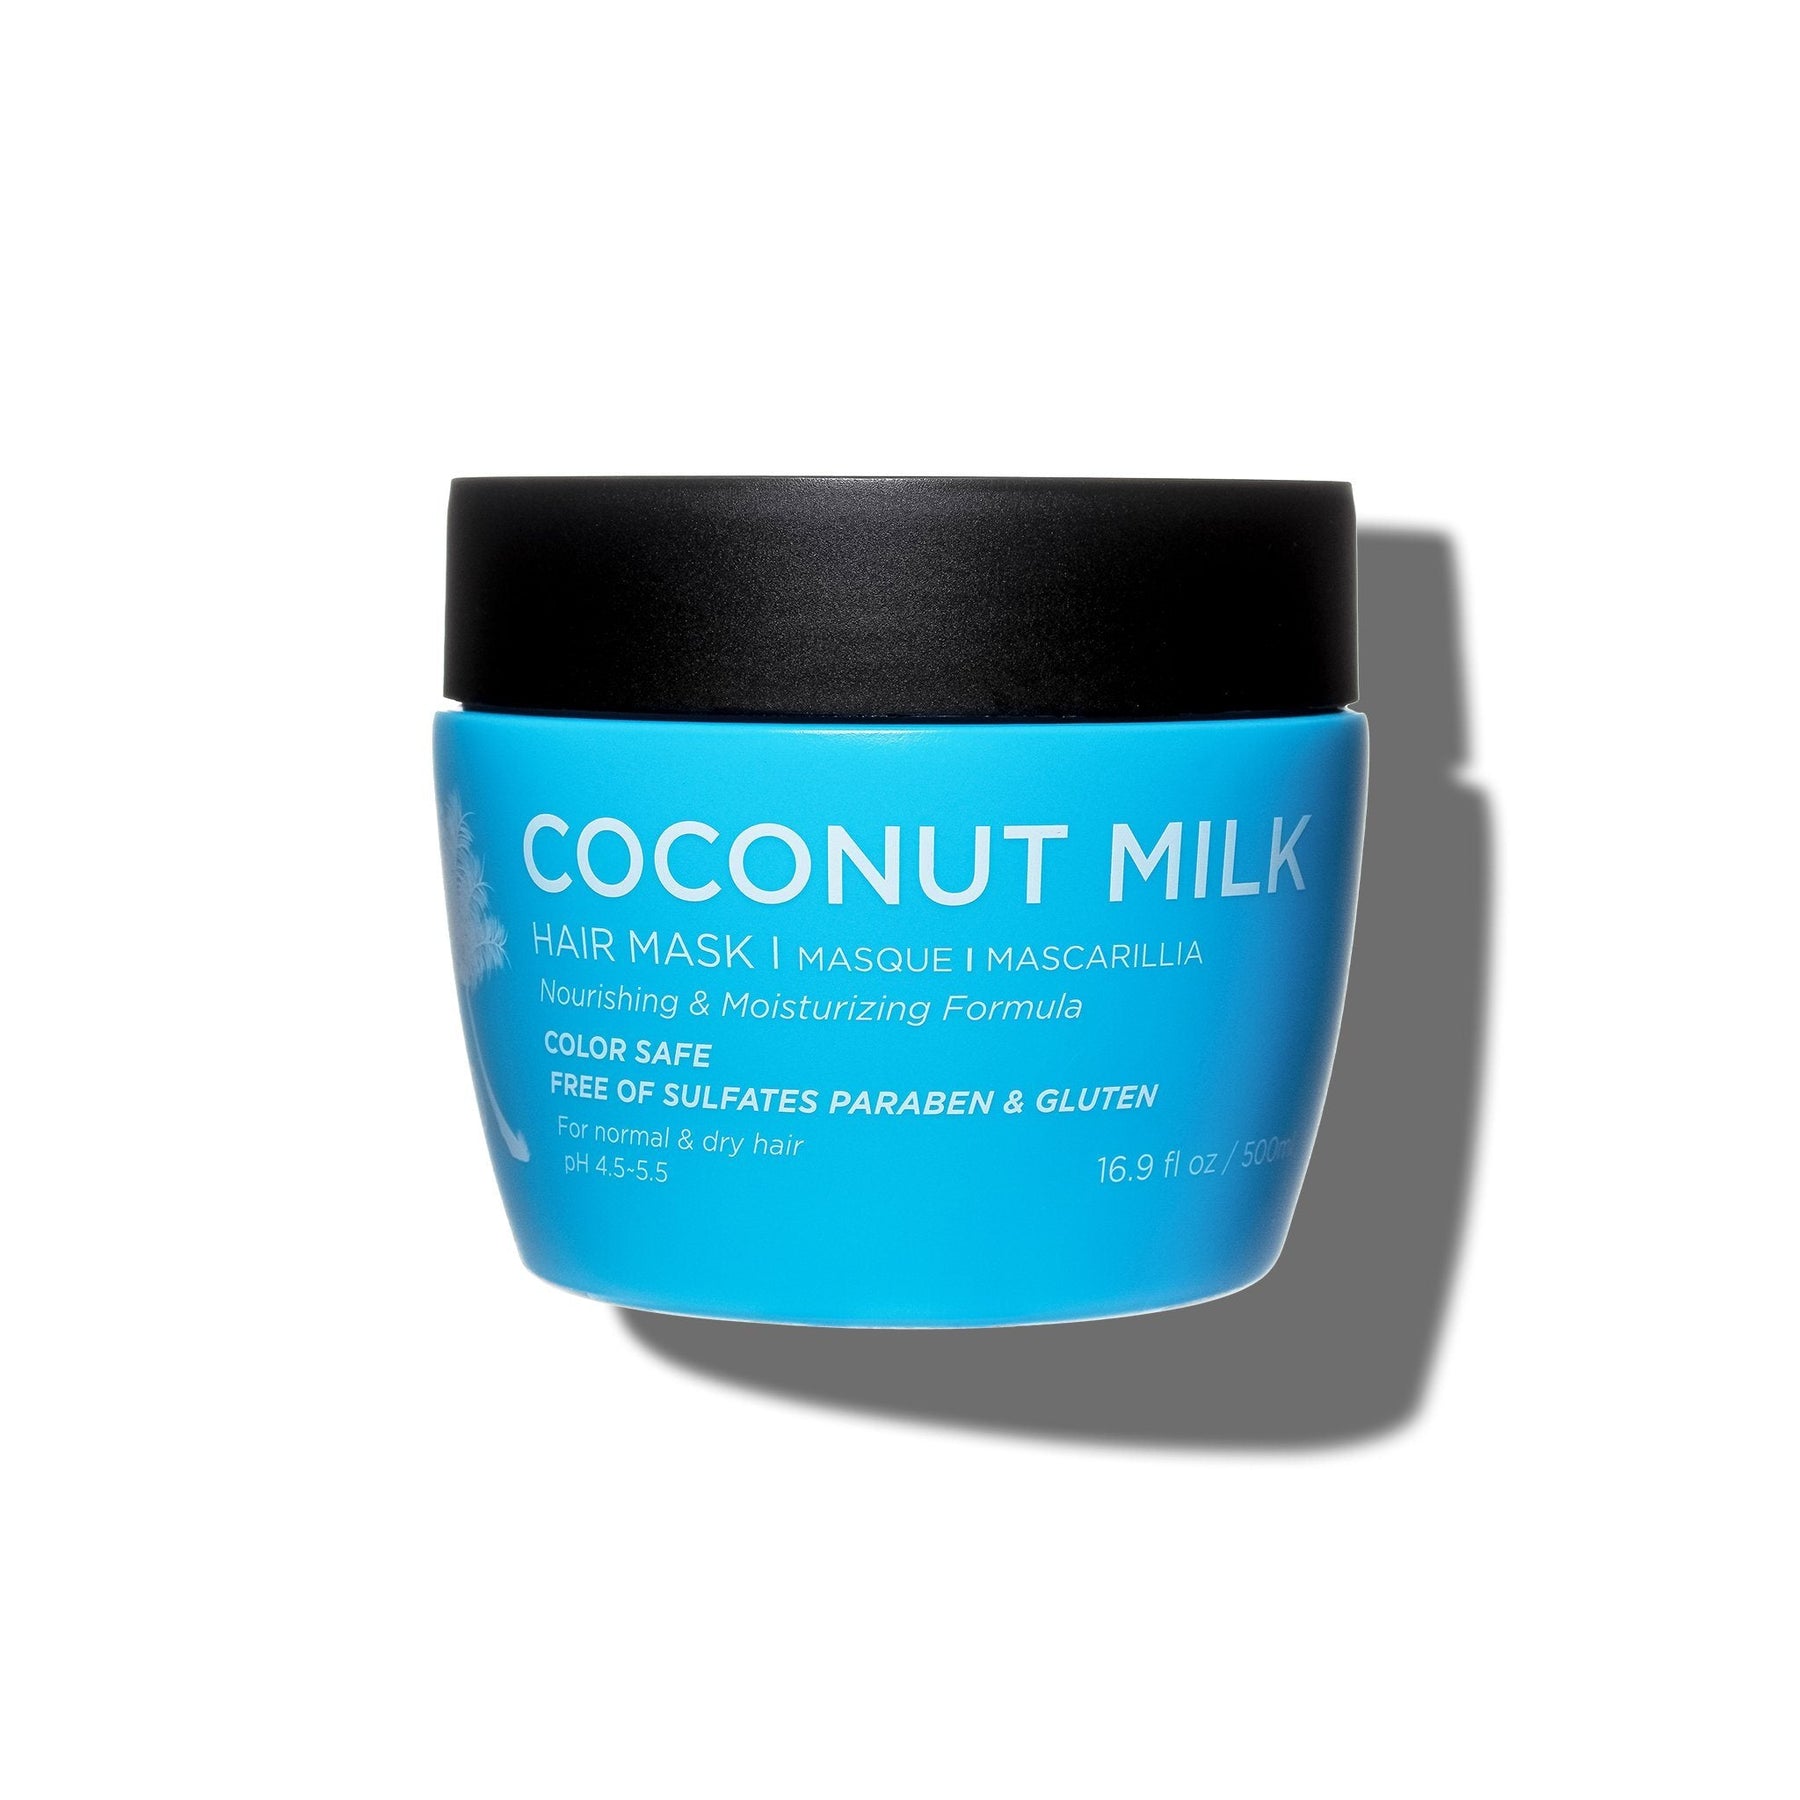 Coconut Milk Hair Mask - ProCare Outlet by Luseta Beauty